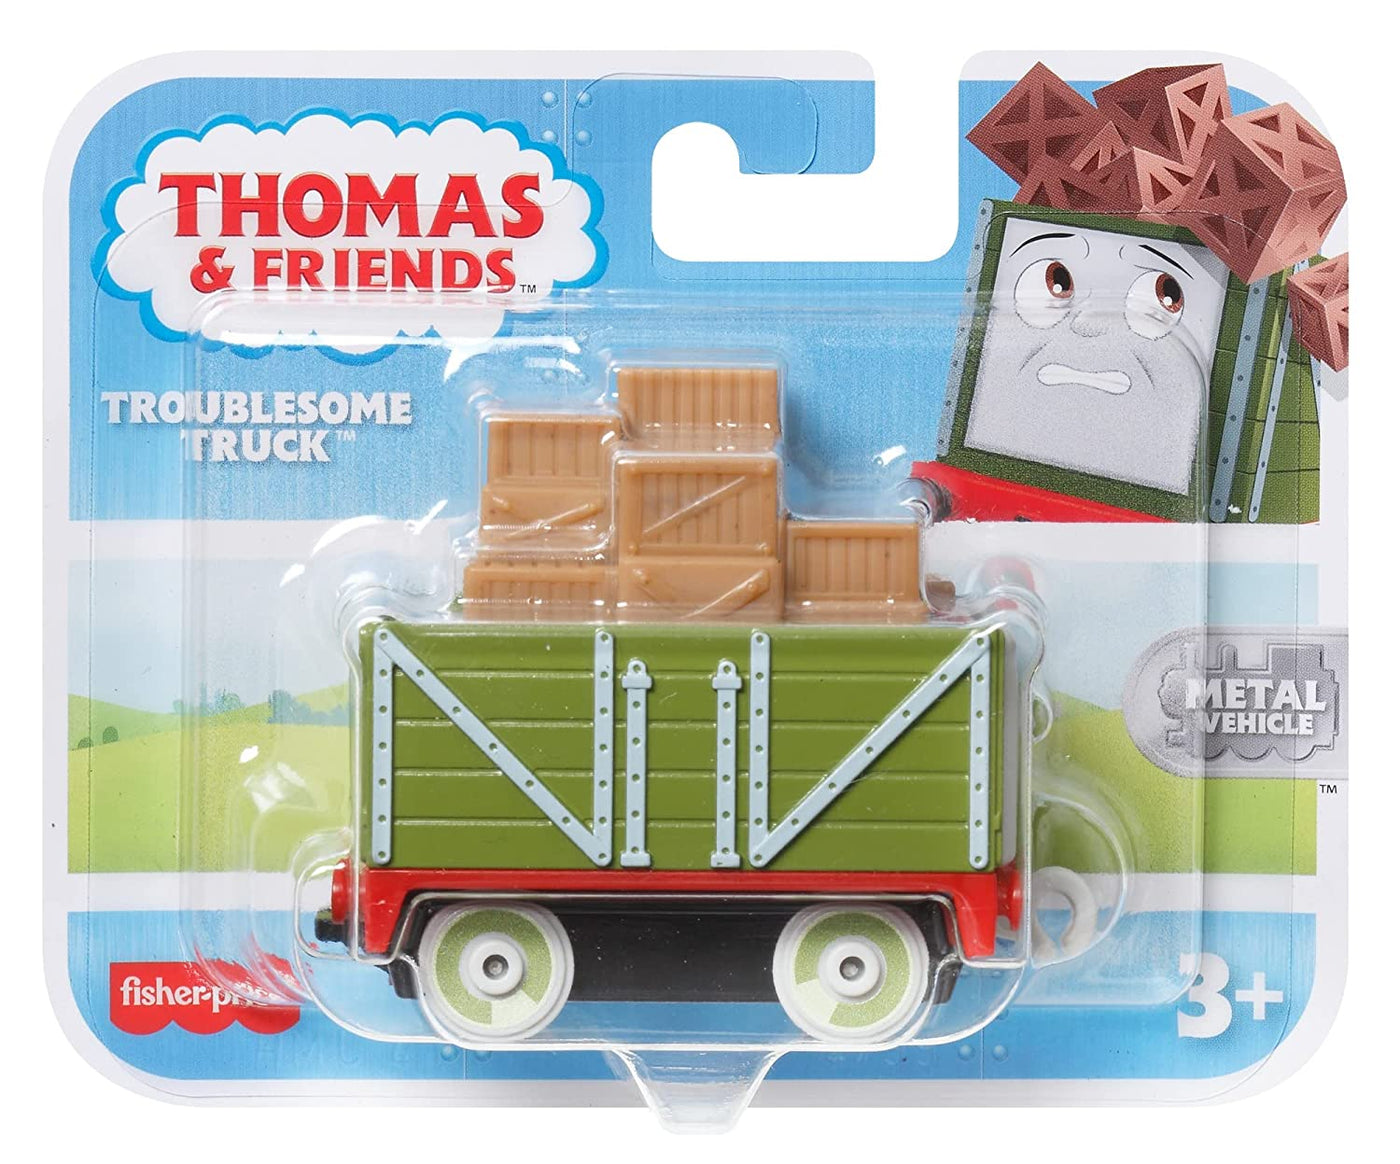 Thomas & Friends Troublesome Truck Metal Engine | Fisher Price